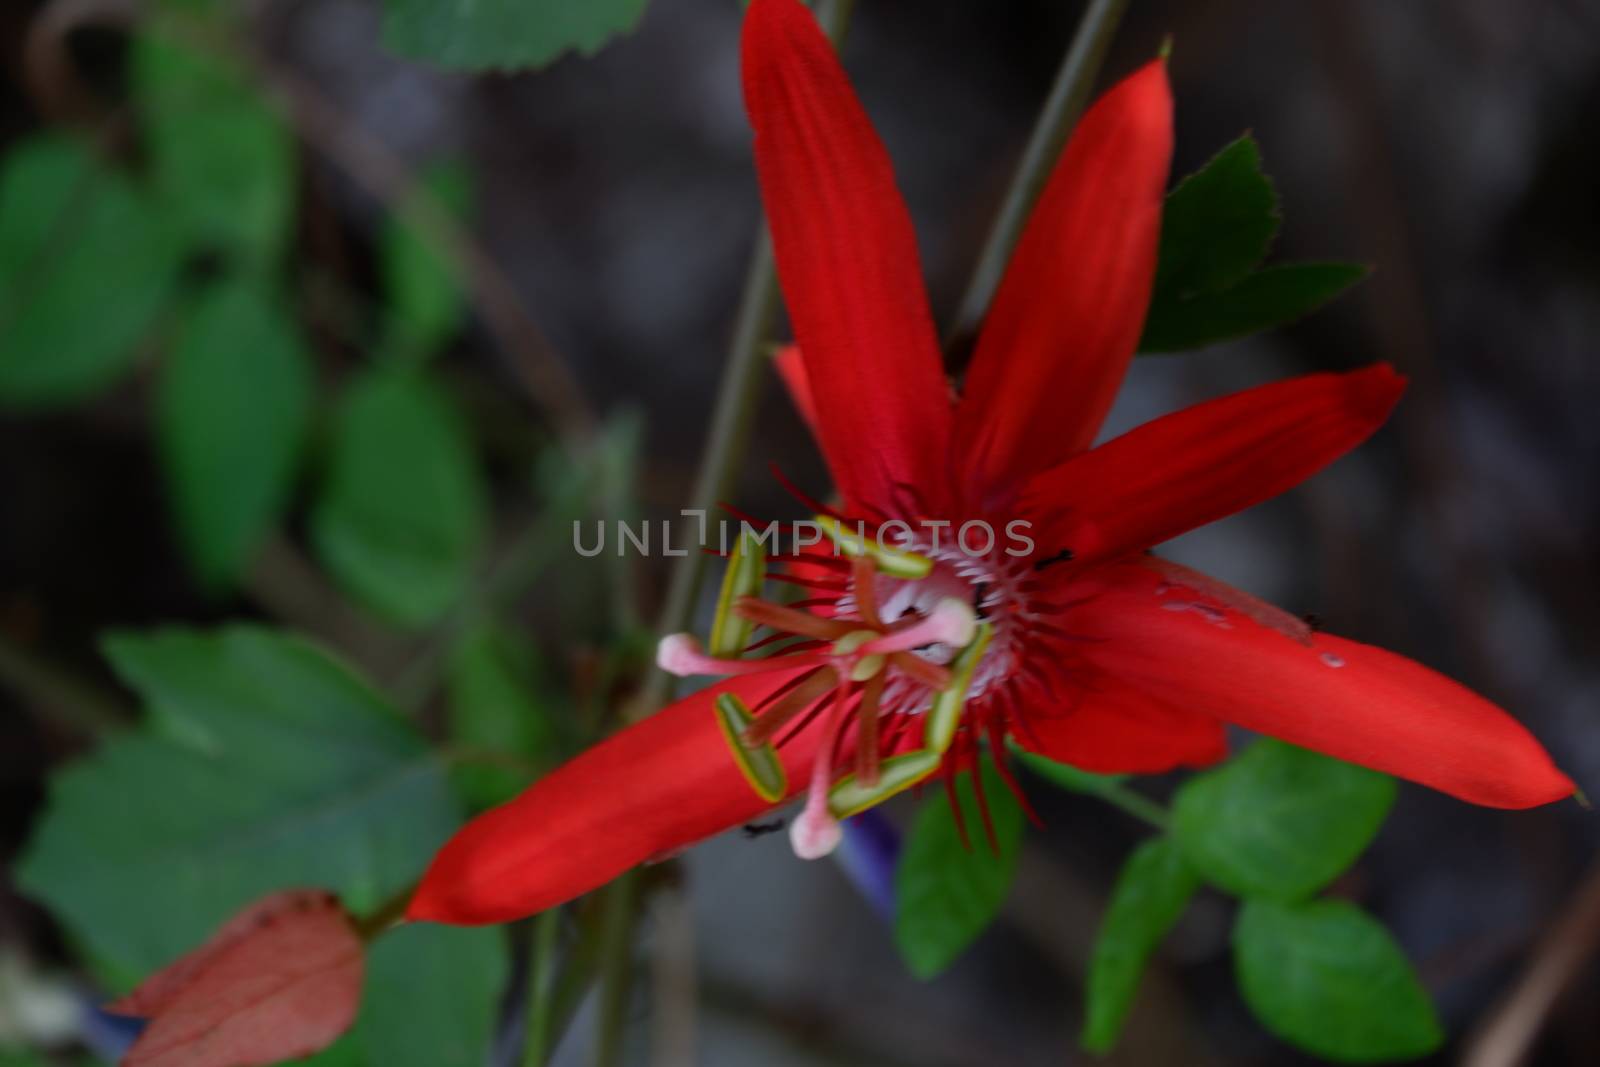 close up image of passiflora coccinea common names scarlet passion flower, red passion flower,dance flower) is a fast growing vine. home decorating vines